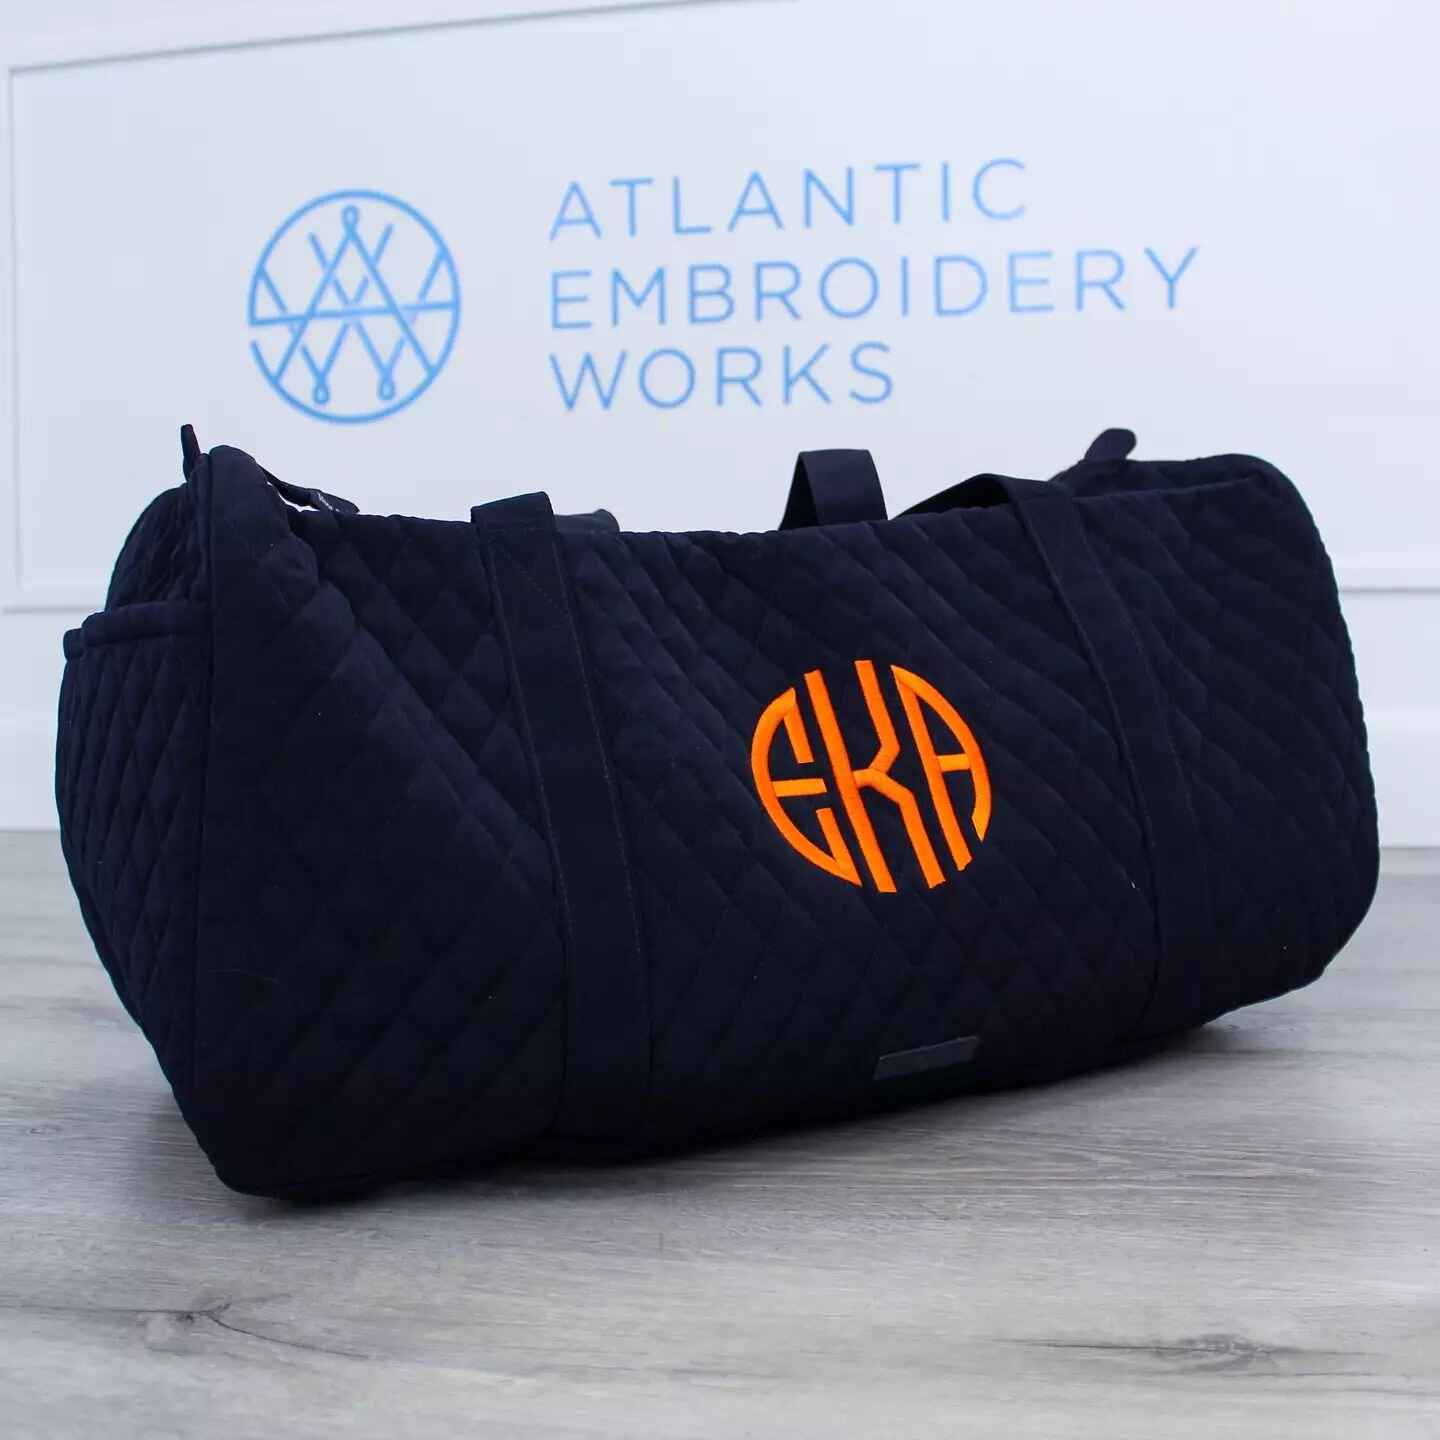 We love how great this looks! Bring us anything that you'd like to get embroidered, and we'll help you review all of your possibilities! We've got your most challenging projects... in the bag!
.
.
.
.
.
#monogrameverythingregretnothing #atlanticembro